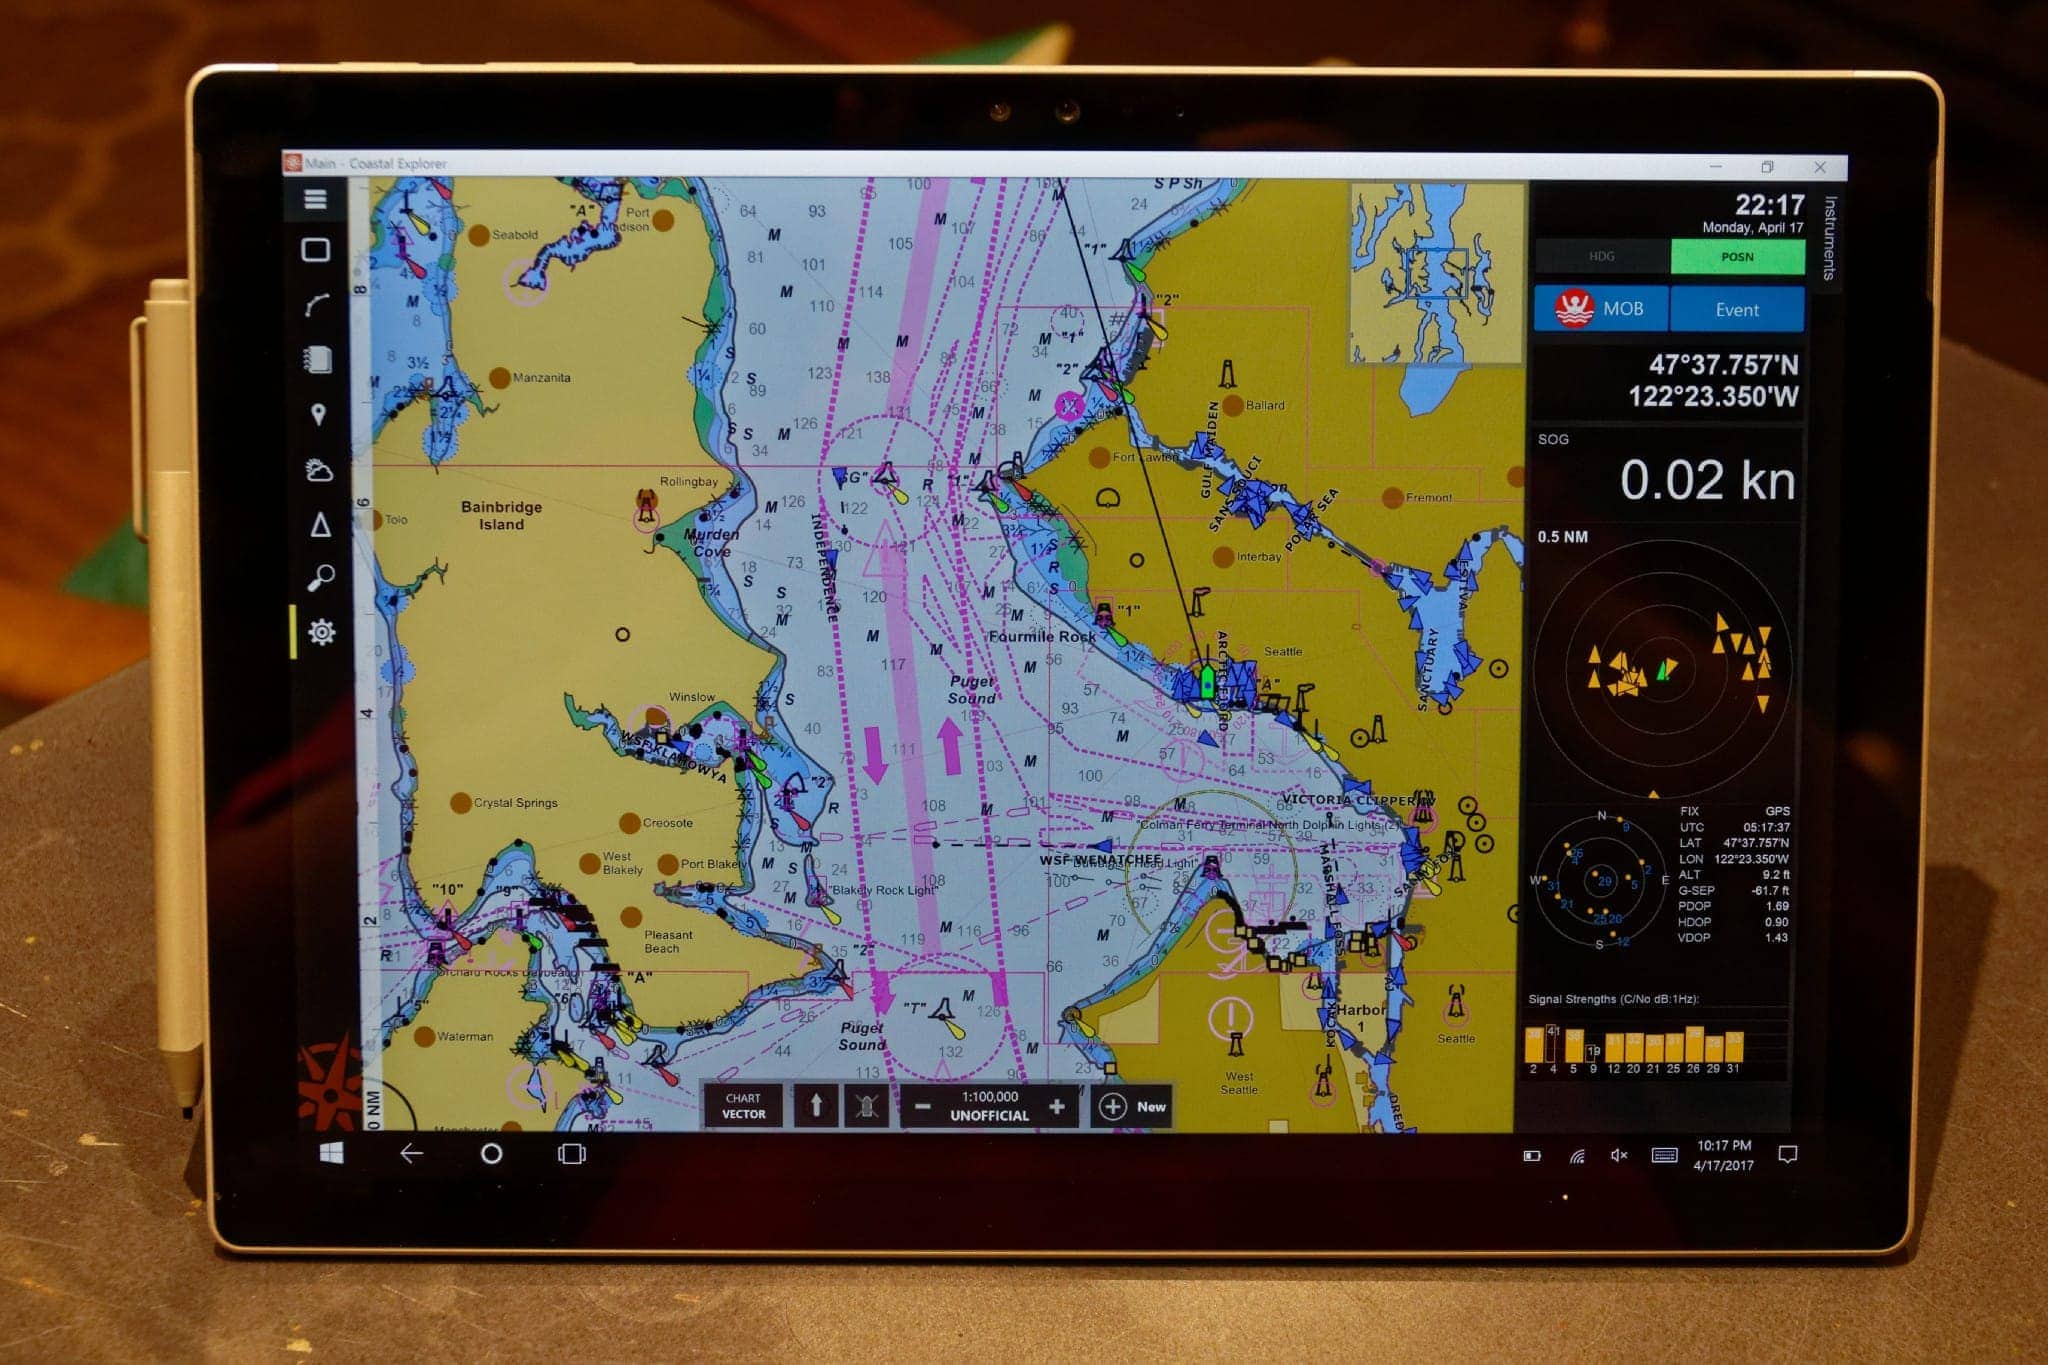 Surface Pro 4 is a great boat computer